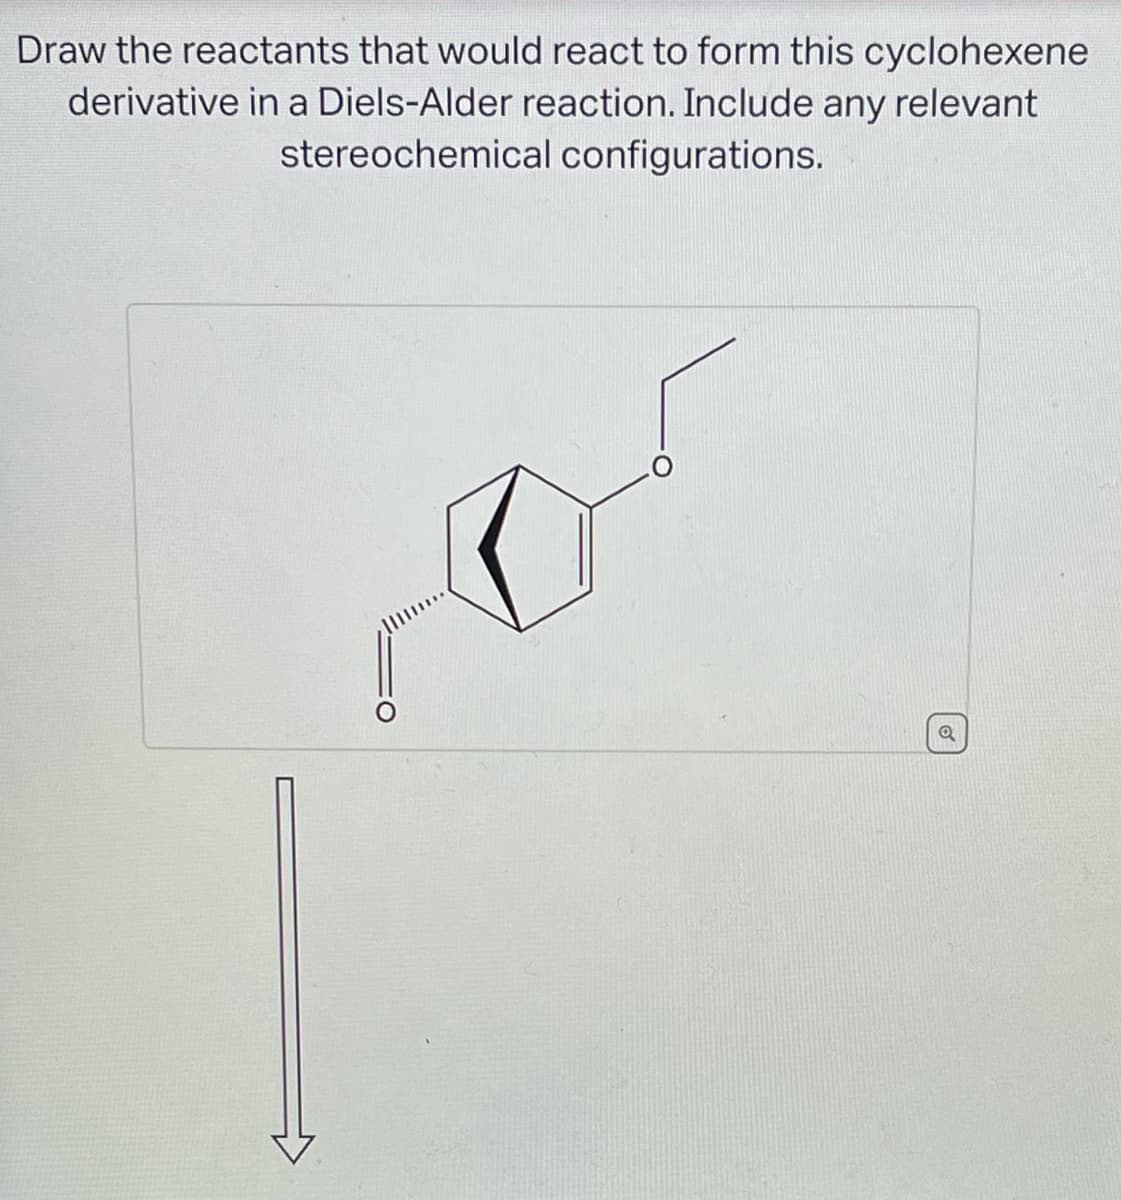 Draw the reactants that would react to form this cyclohexene
derivative in a Diels-Alder reaction. Include any relevant
stereochemical configurations.
Q